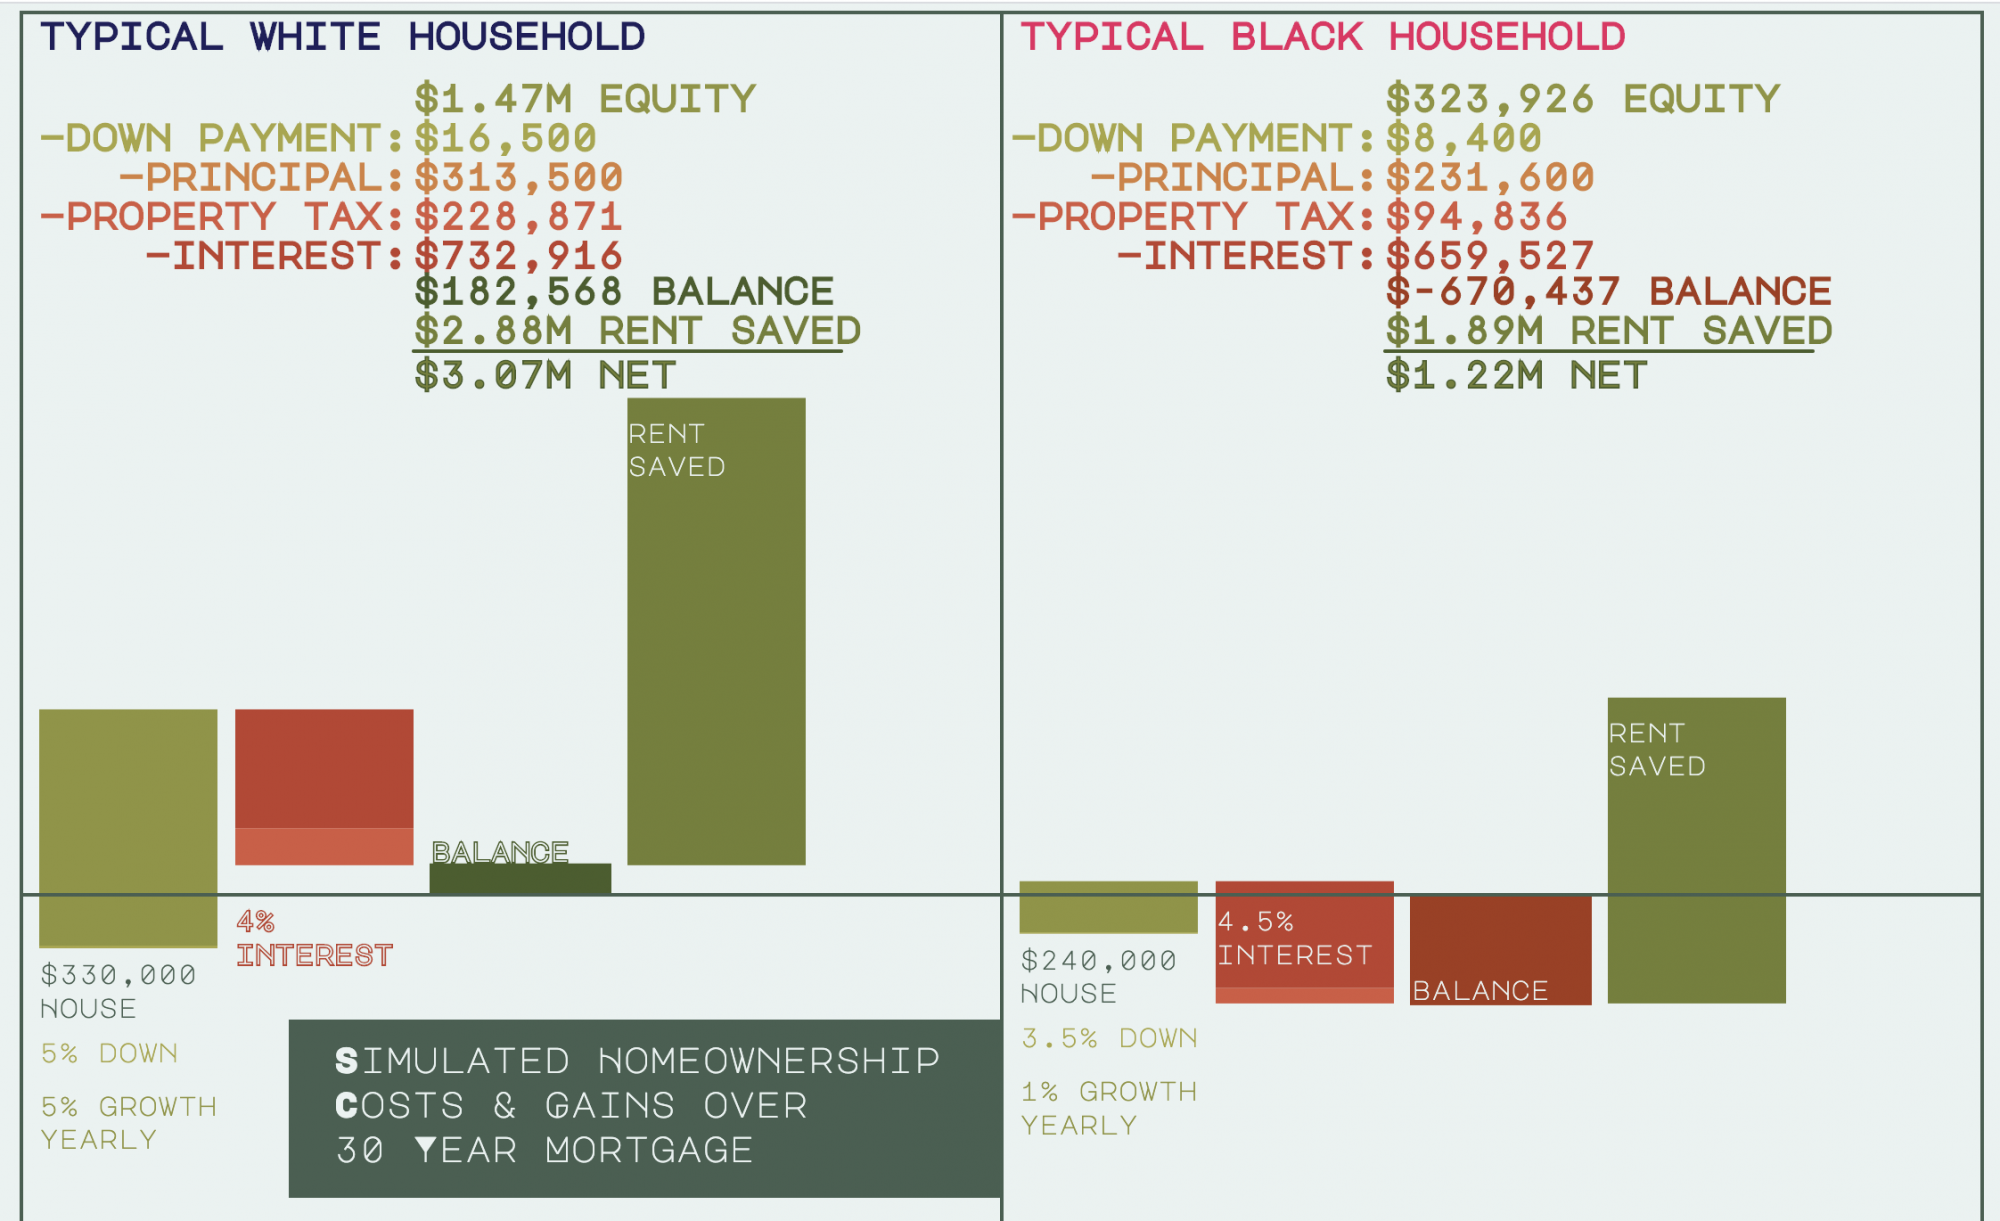 disparities in homeownership and access to credit contribute to cumulative wealth inequality